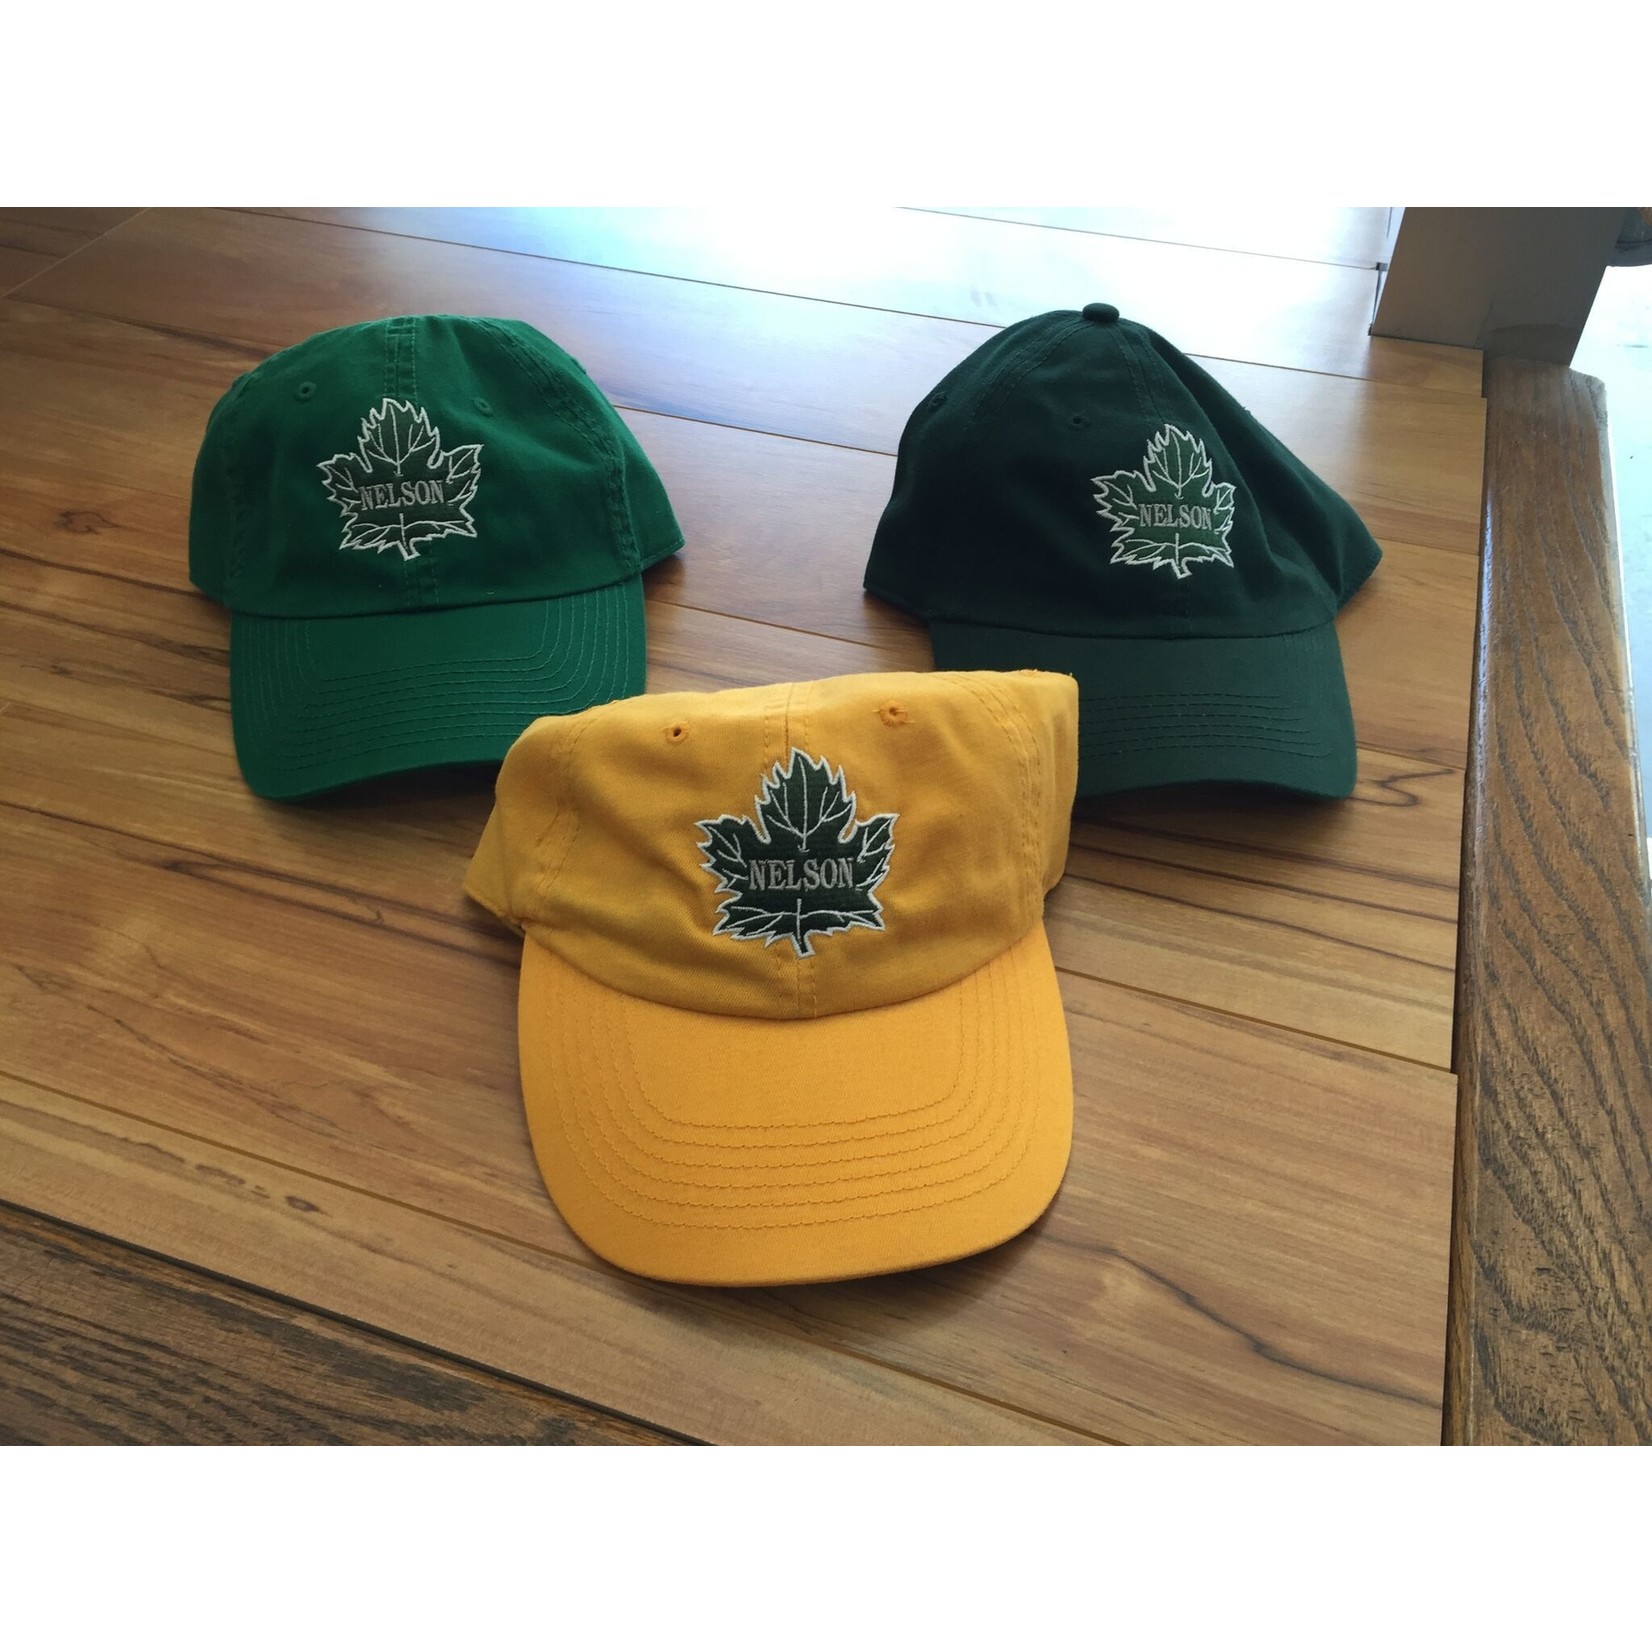 Nelson Leafs Cap CT6550